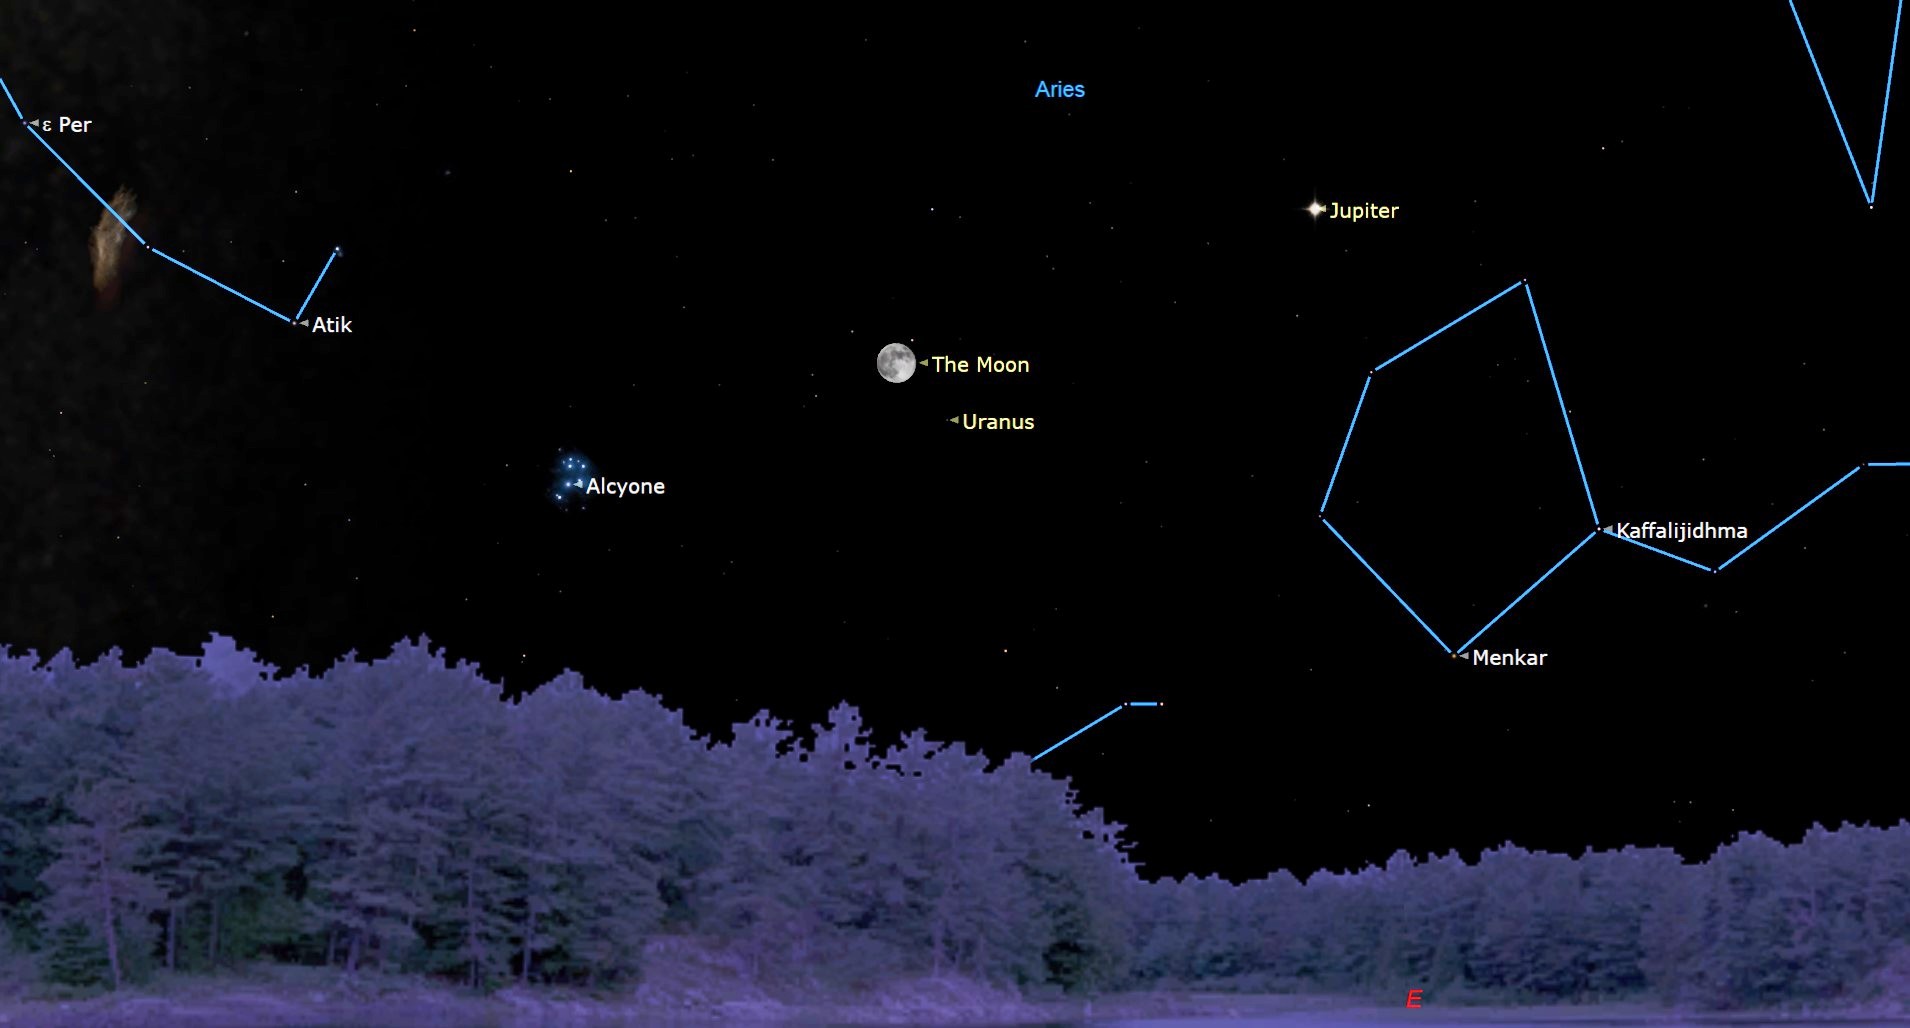 blue lines connect stars in the night sky to show constellations. uranus, jupiter and the moon are also shown